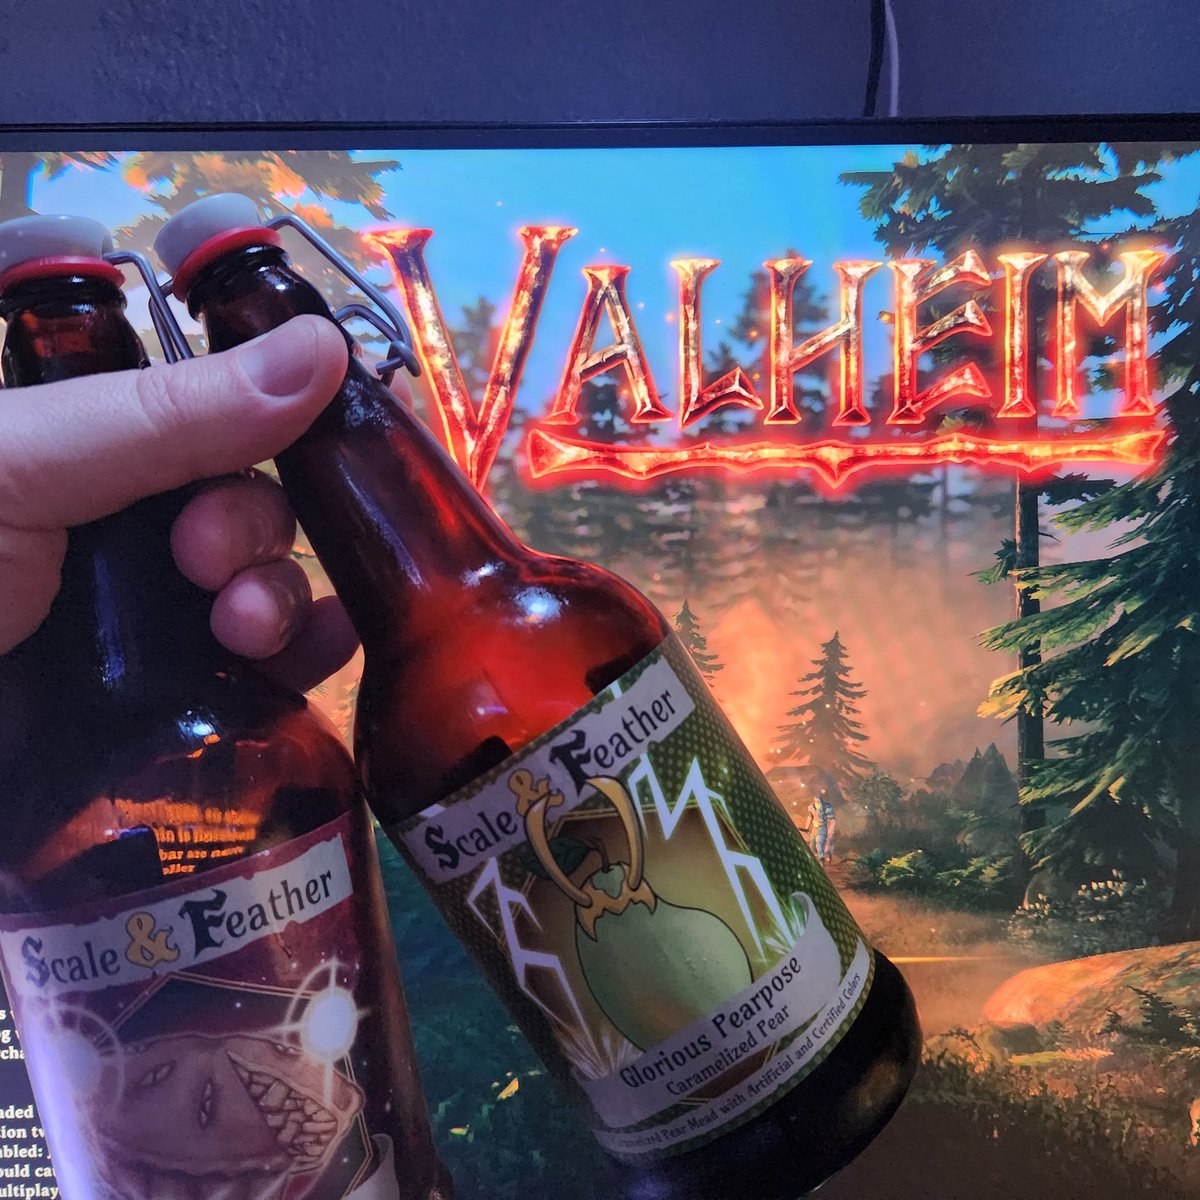 Starting a little late, but damn shortly!
New Valheim play. Trying a new system.
Hosted by @servertron_io !

Also, get in here and help me finish what's left of these two spirits from @SnFMeadery